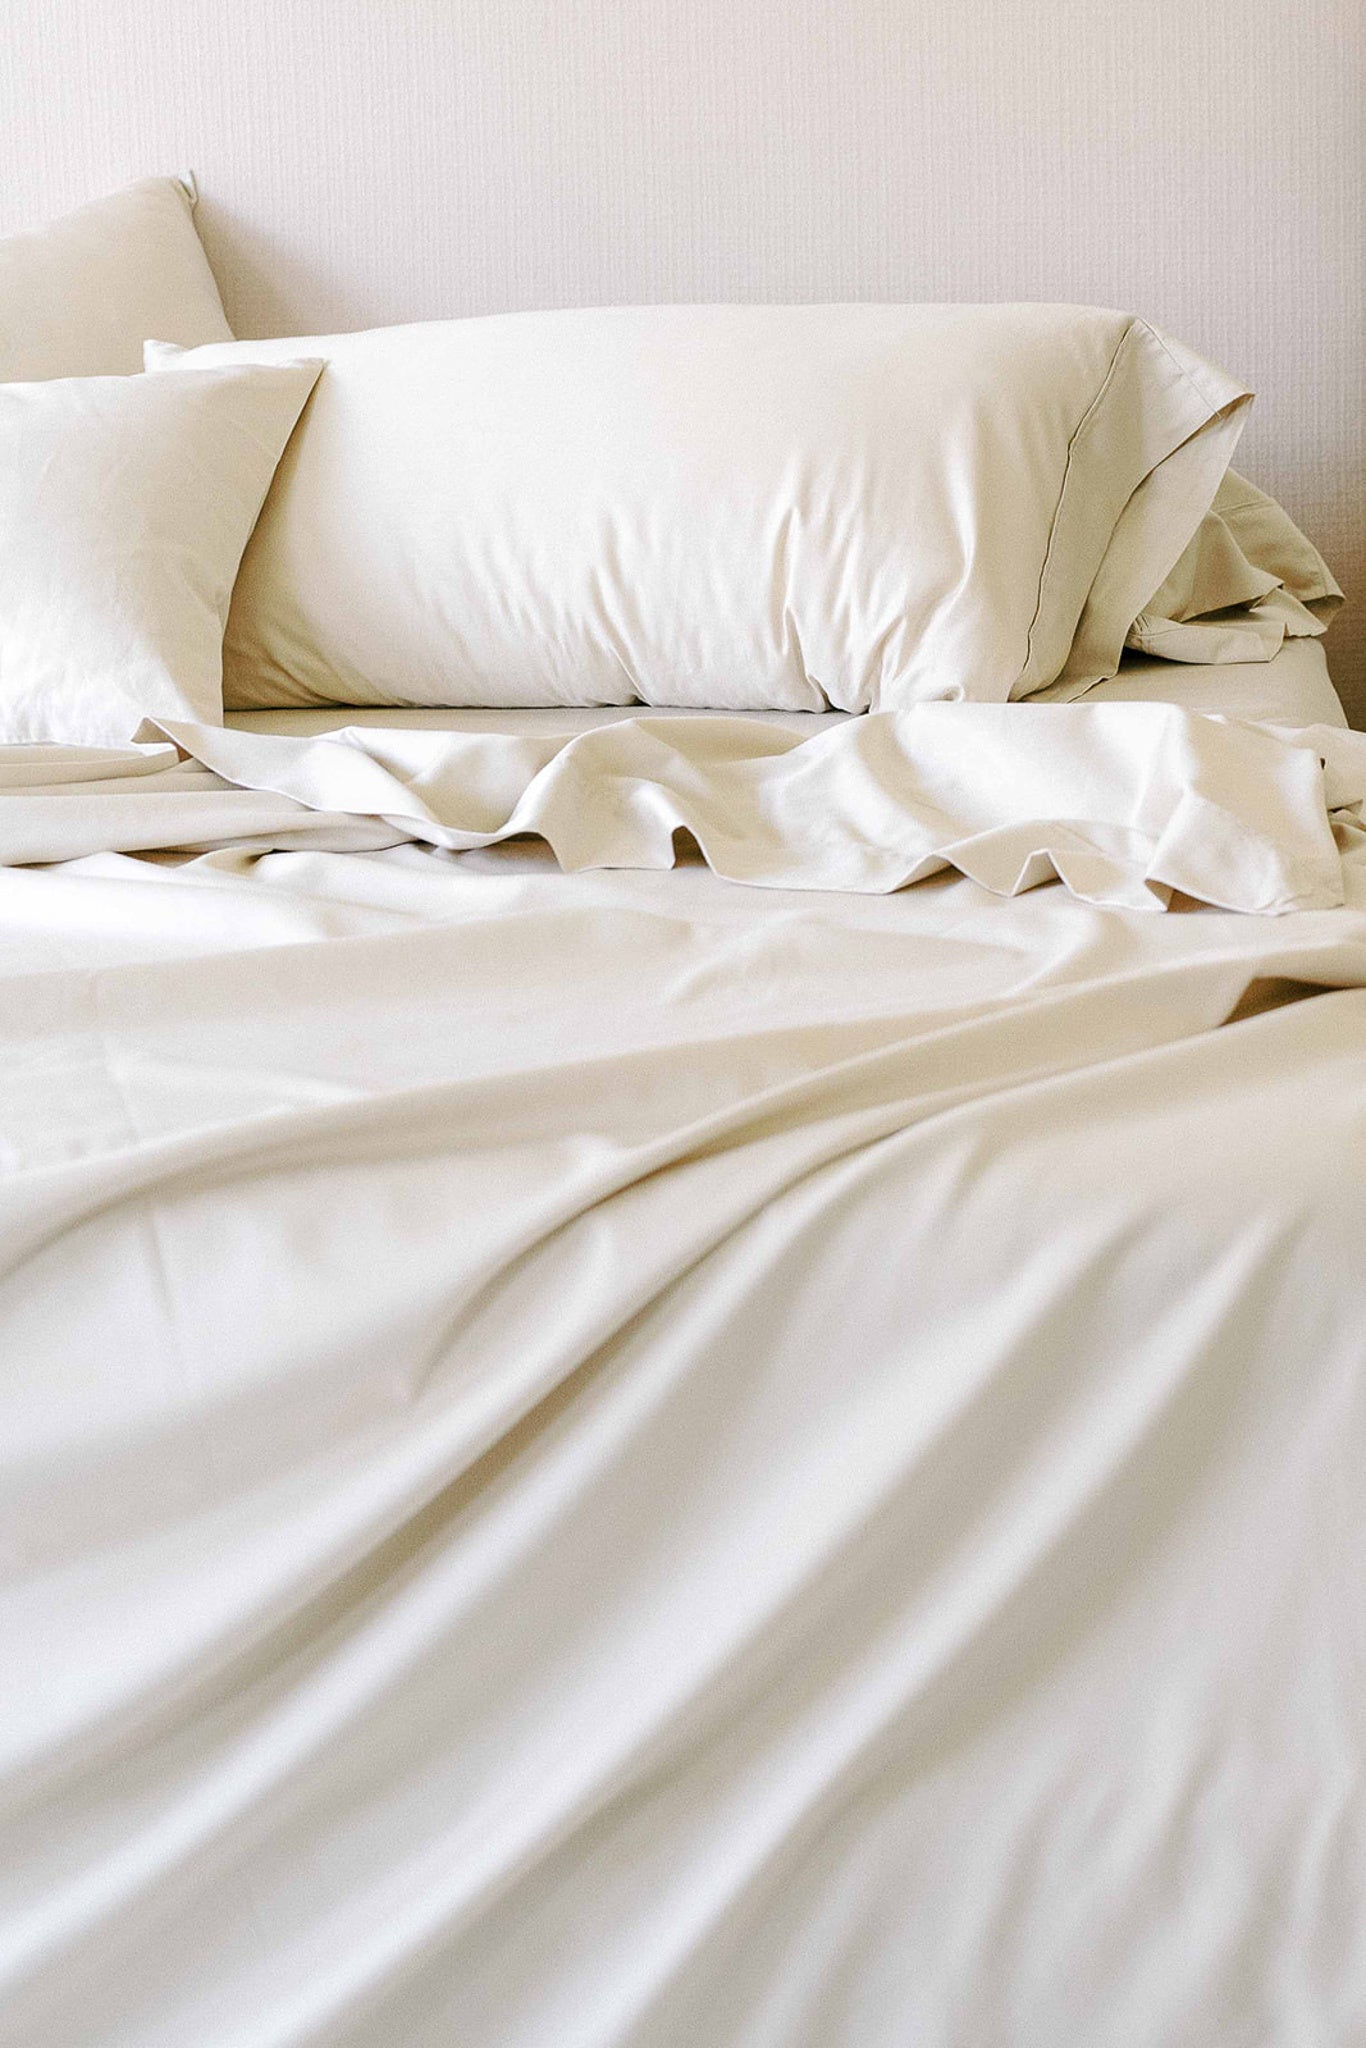 Close-up of cotton sheets, promoting airflow and comfort